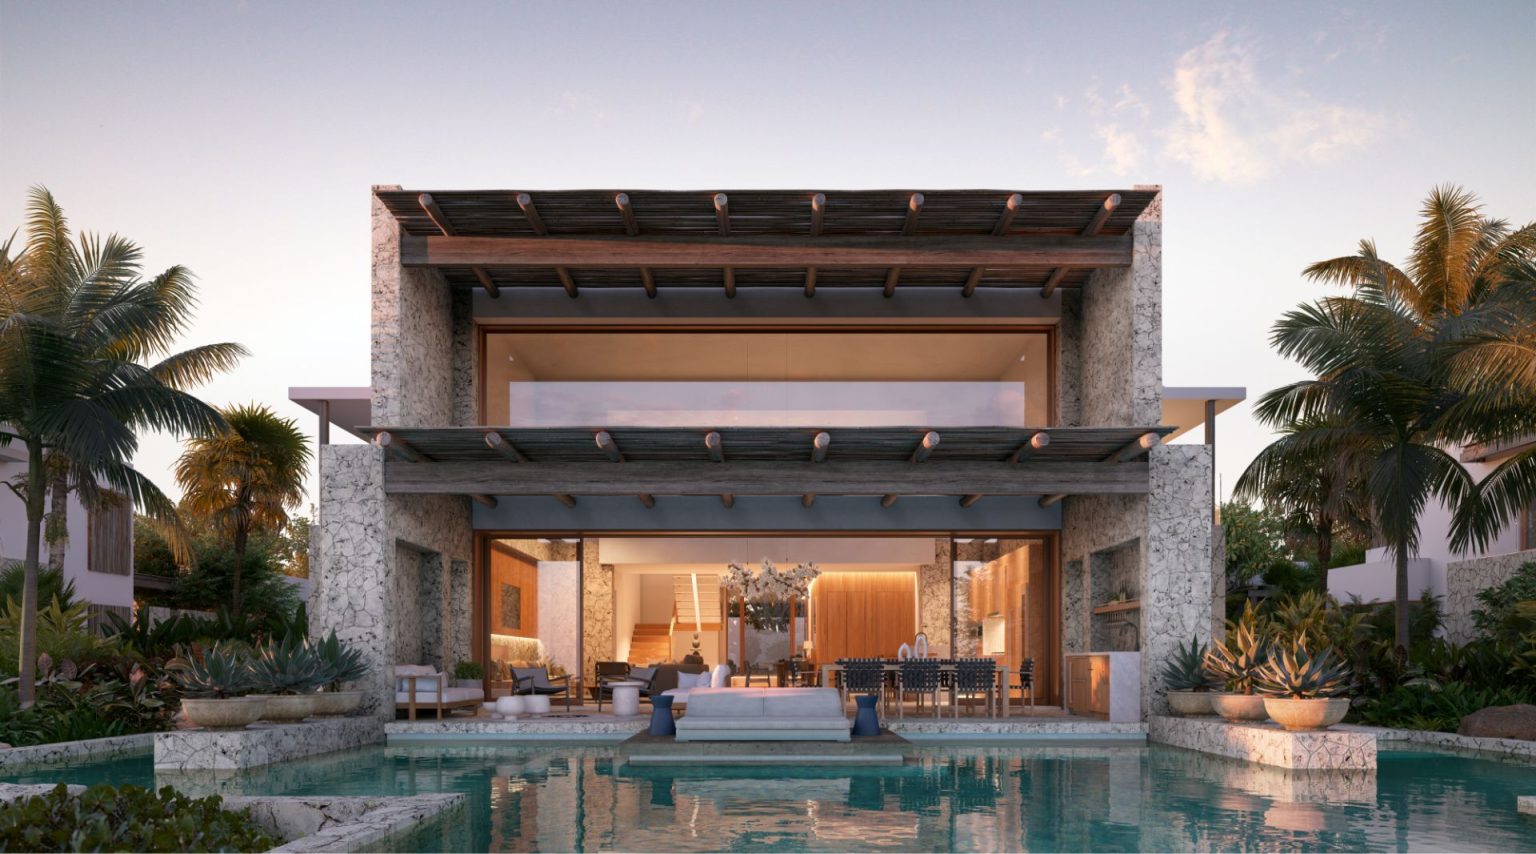 The Strand Turks and Caicos - exterior view of Luxury Residences at sunset with modern, natural stone pool, seating area and lighted interior